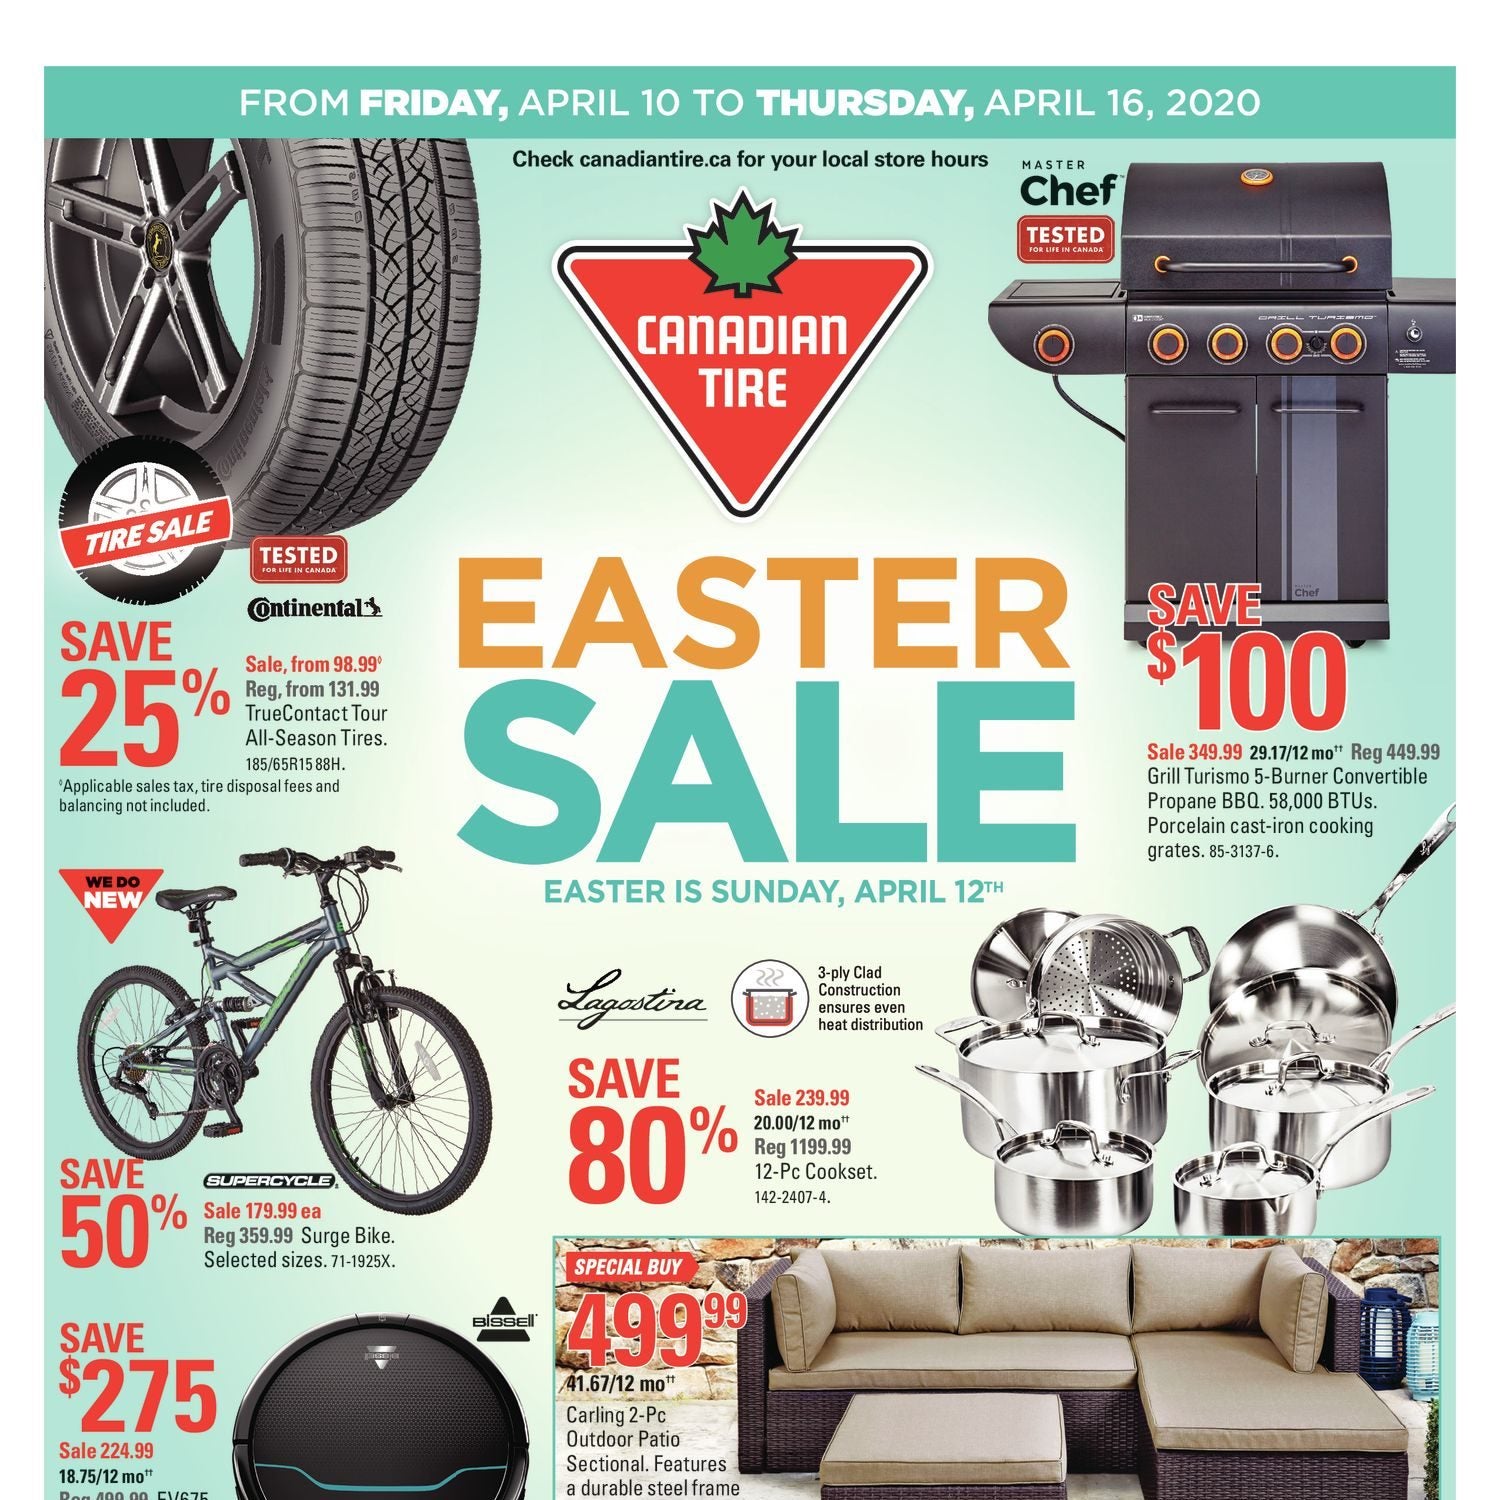 Canadian Tire Weekly Flyer Weekly Easter Sale Apr 10 16